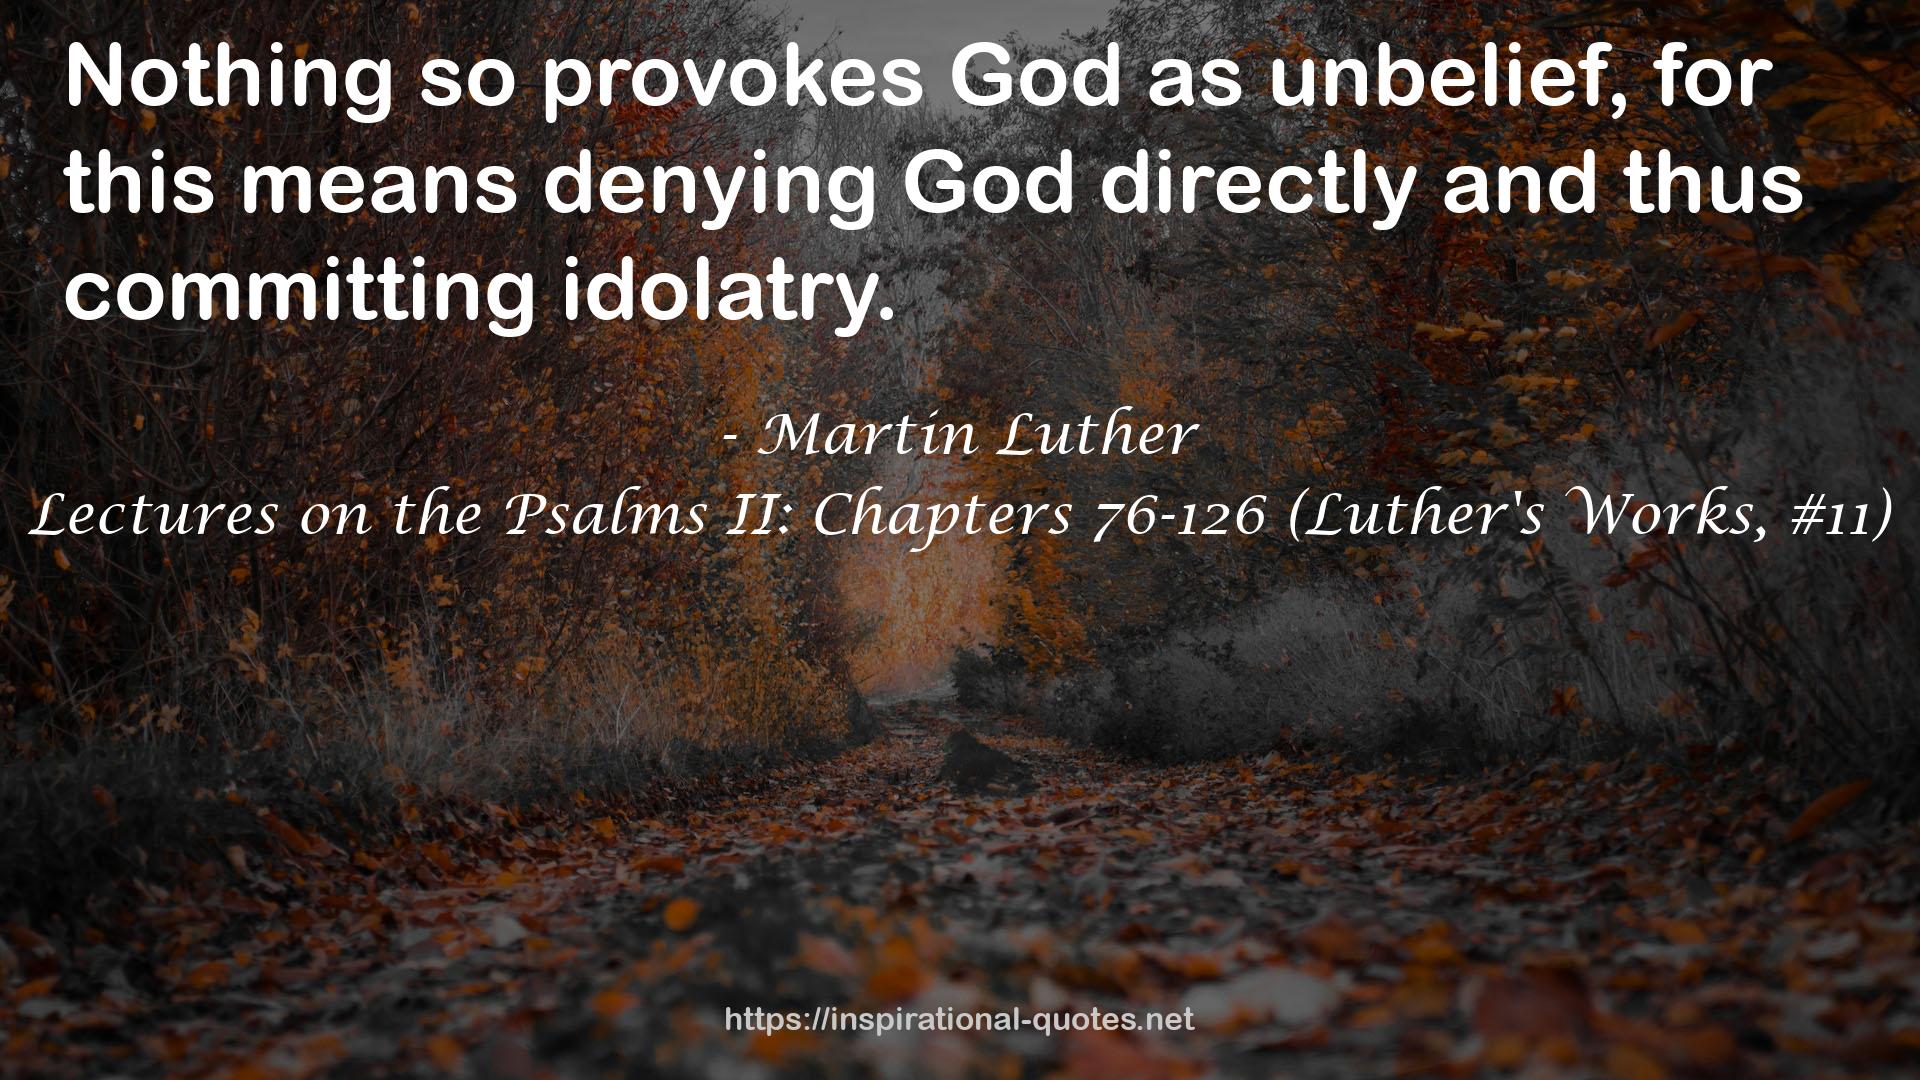 Lectures on the Psalms II: Chapters 76-126 (Luther's Works, #11) QUOTES